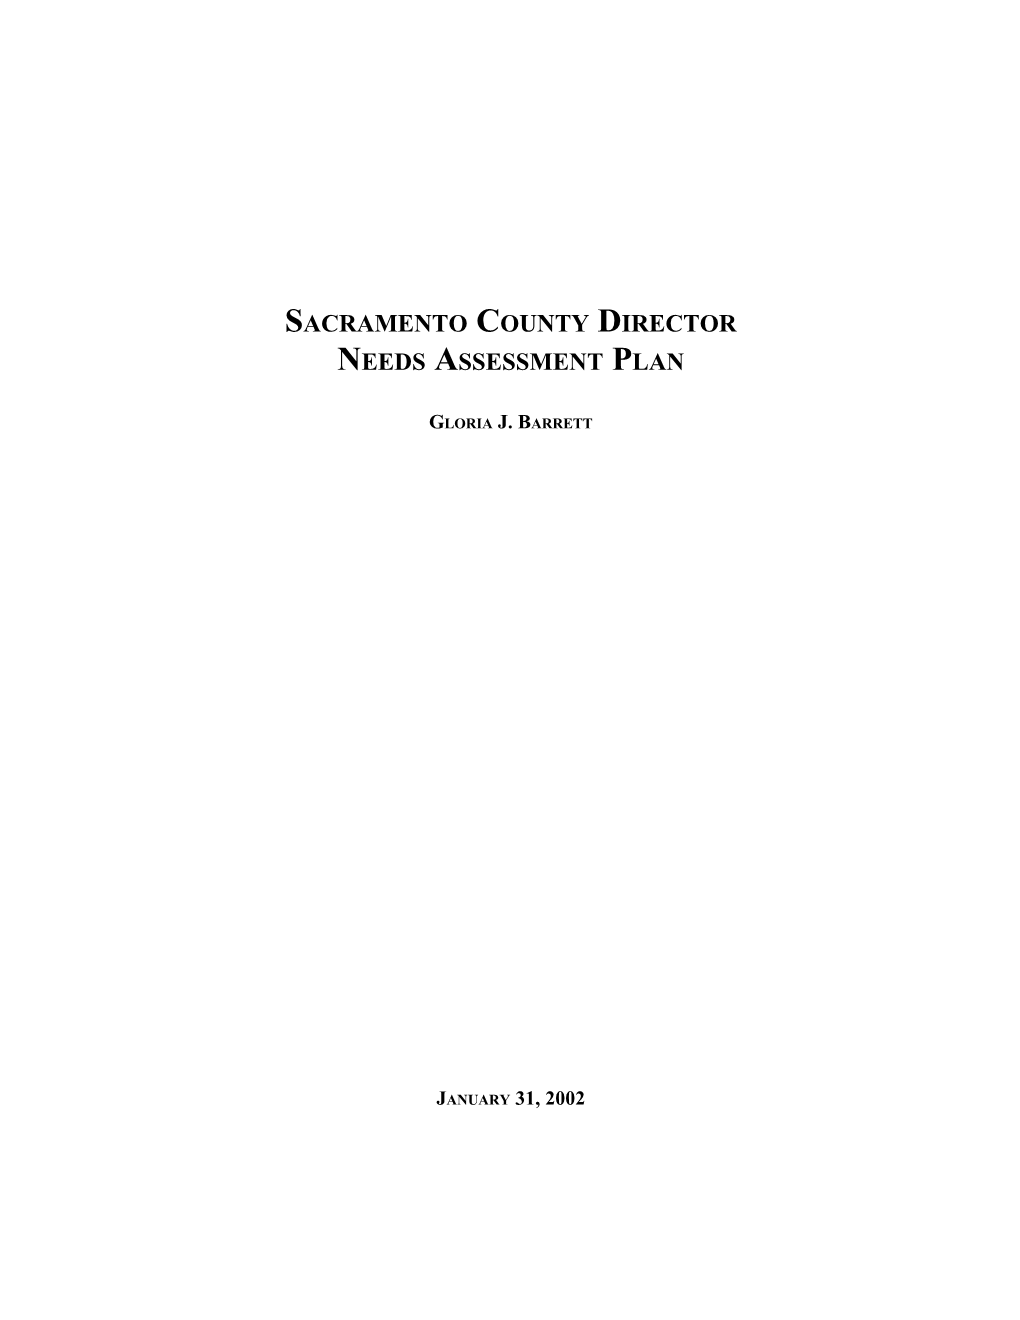 Sacramento County Encompasses Approximately 994 Square Miles in the Middle of the 400-Mile